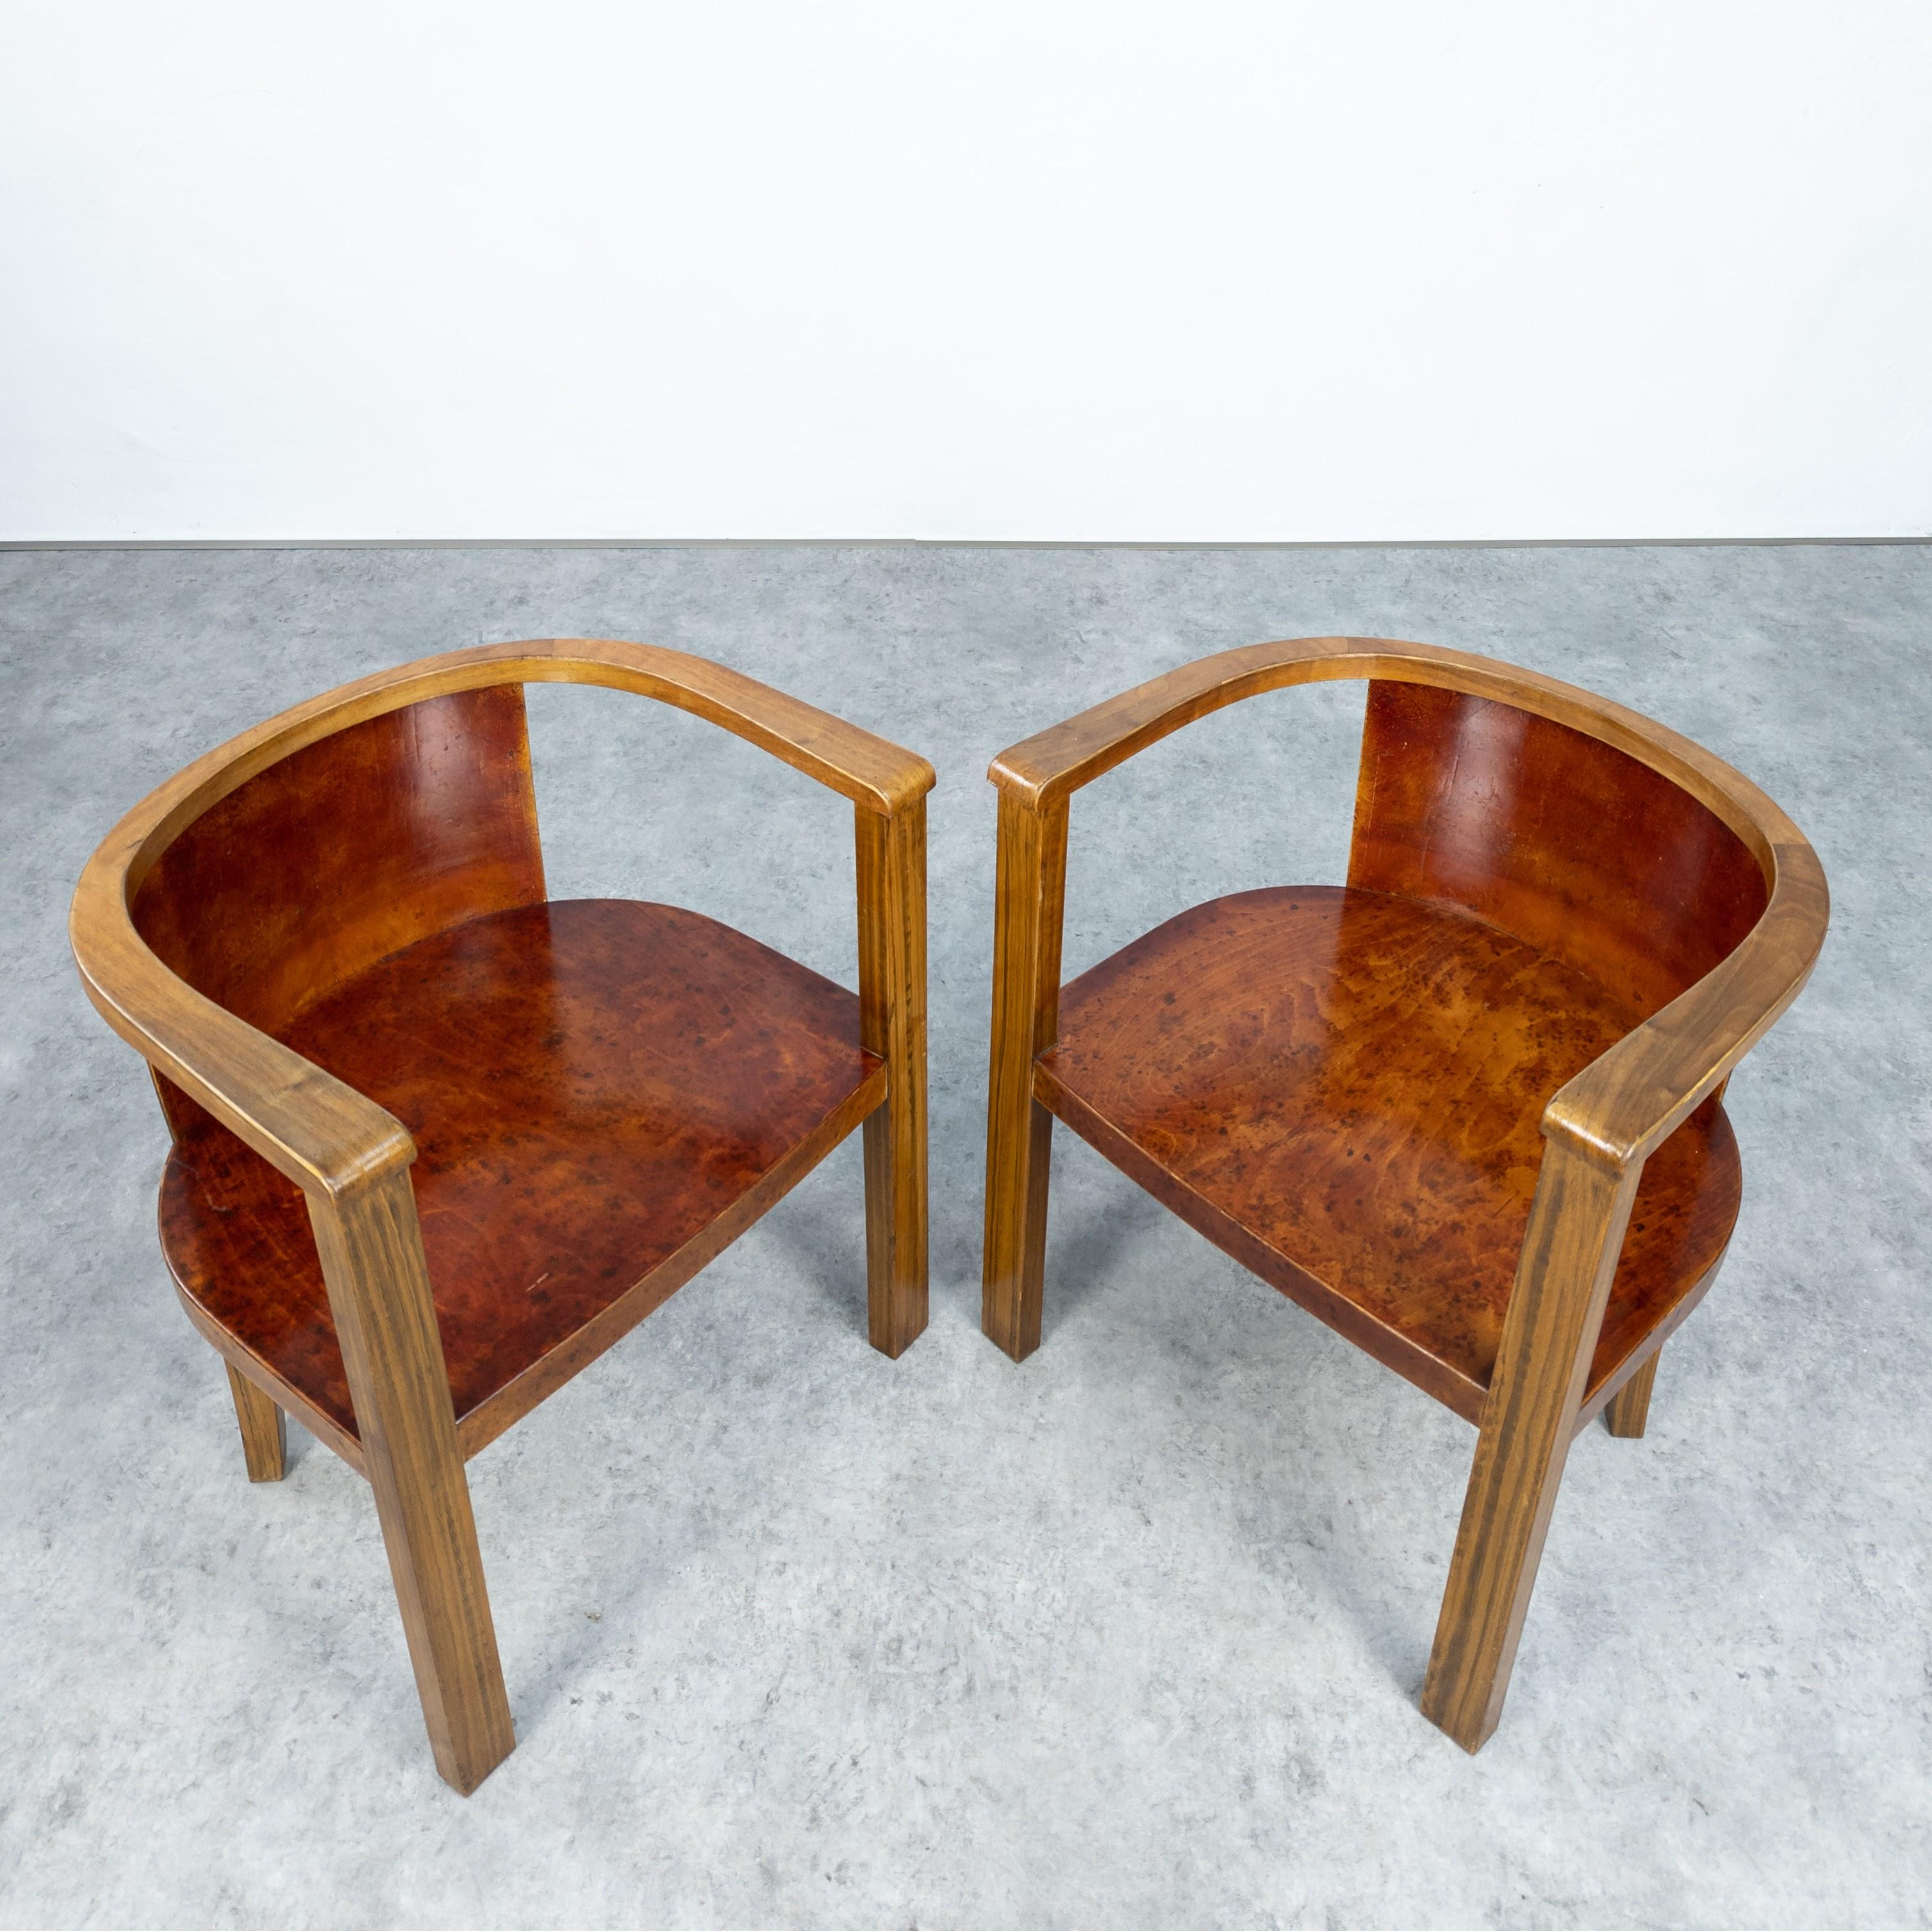 Beech Pair of 1930's German Modernist Barrel Chairs For Sale